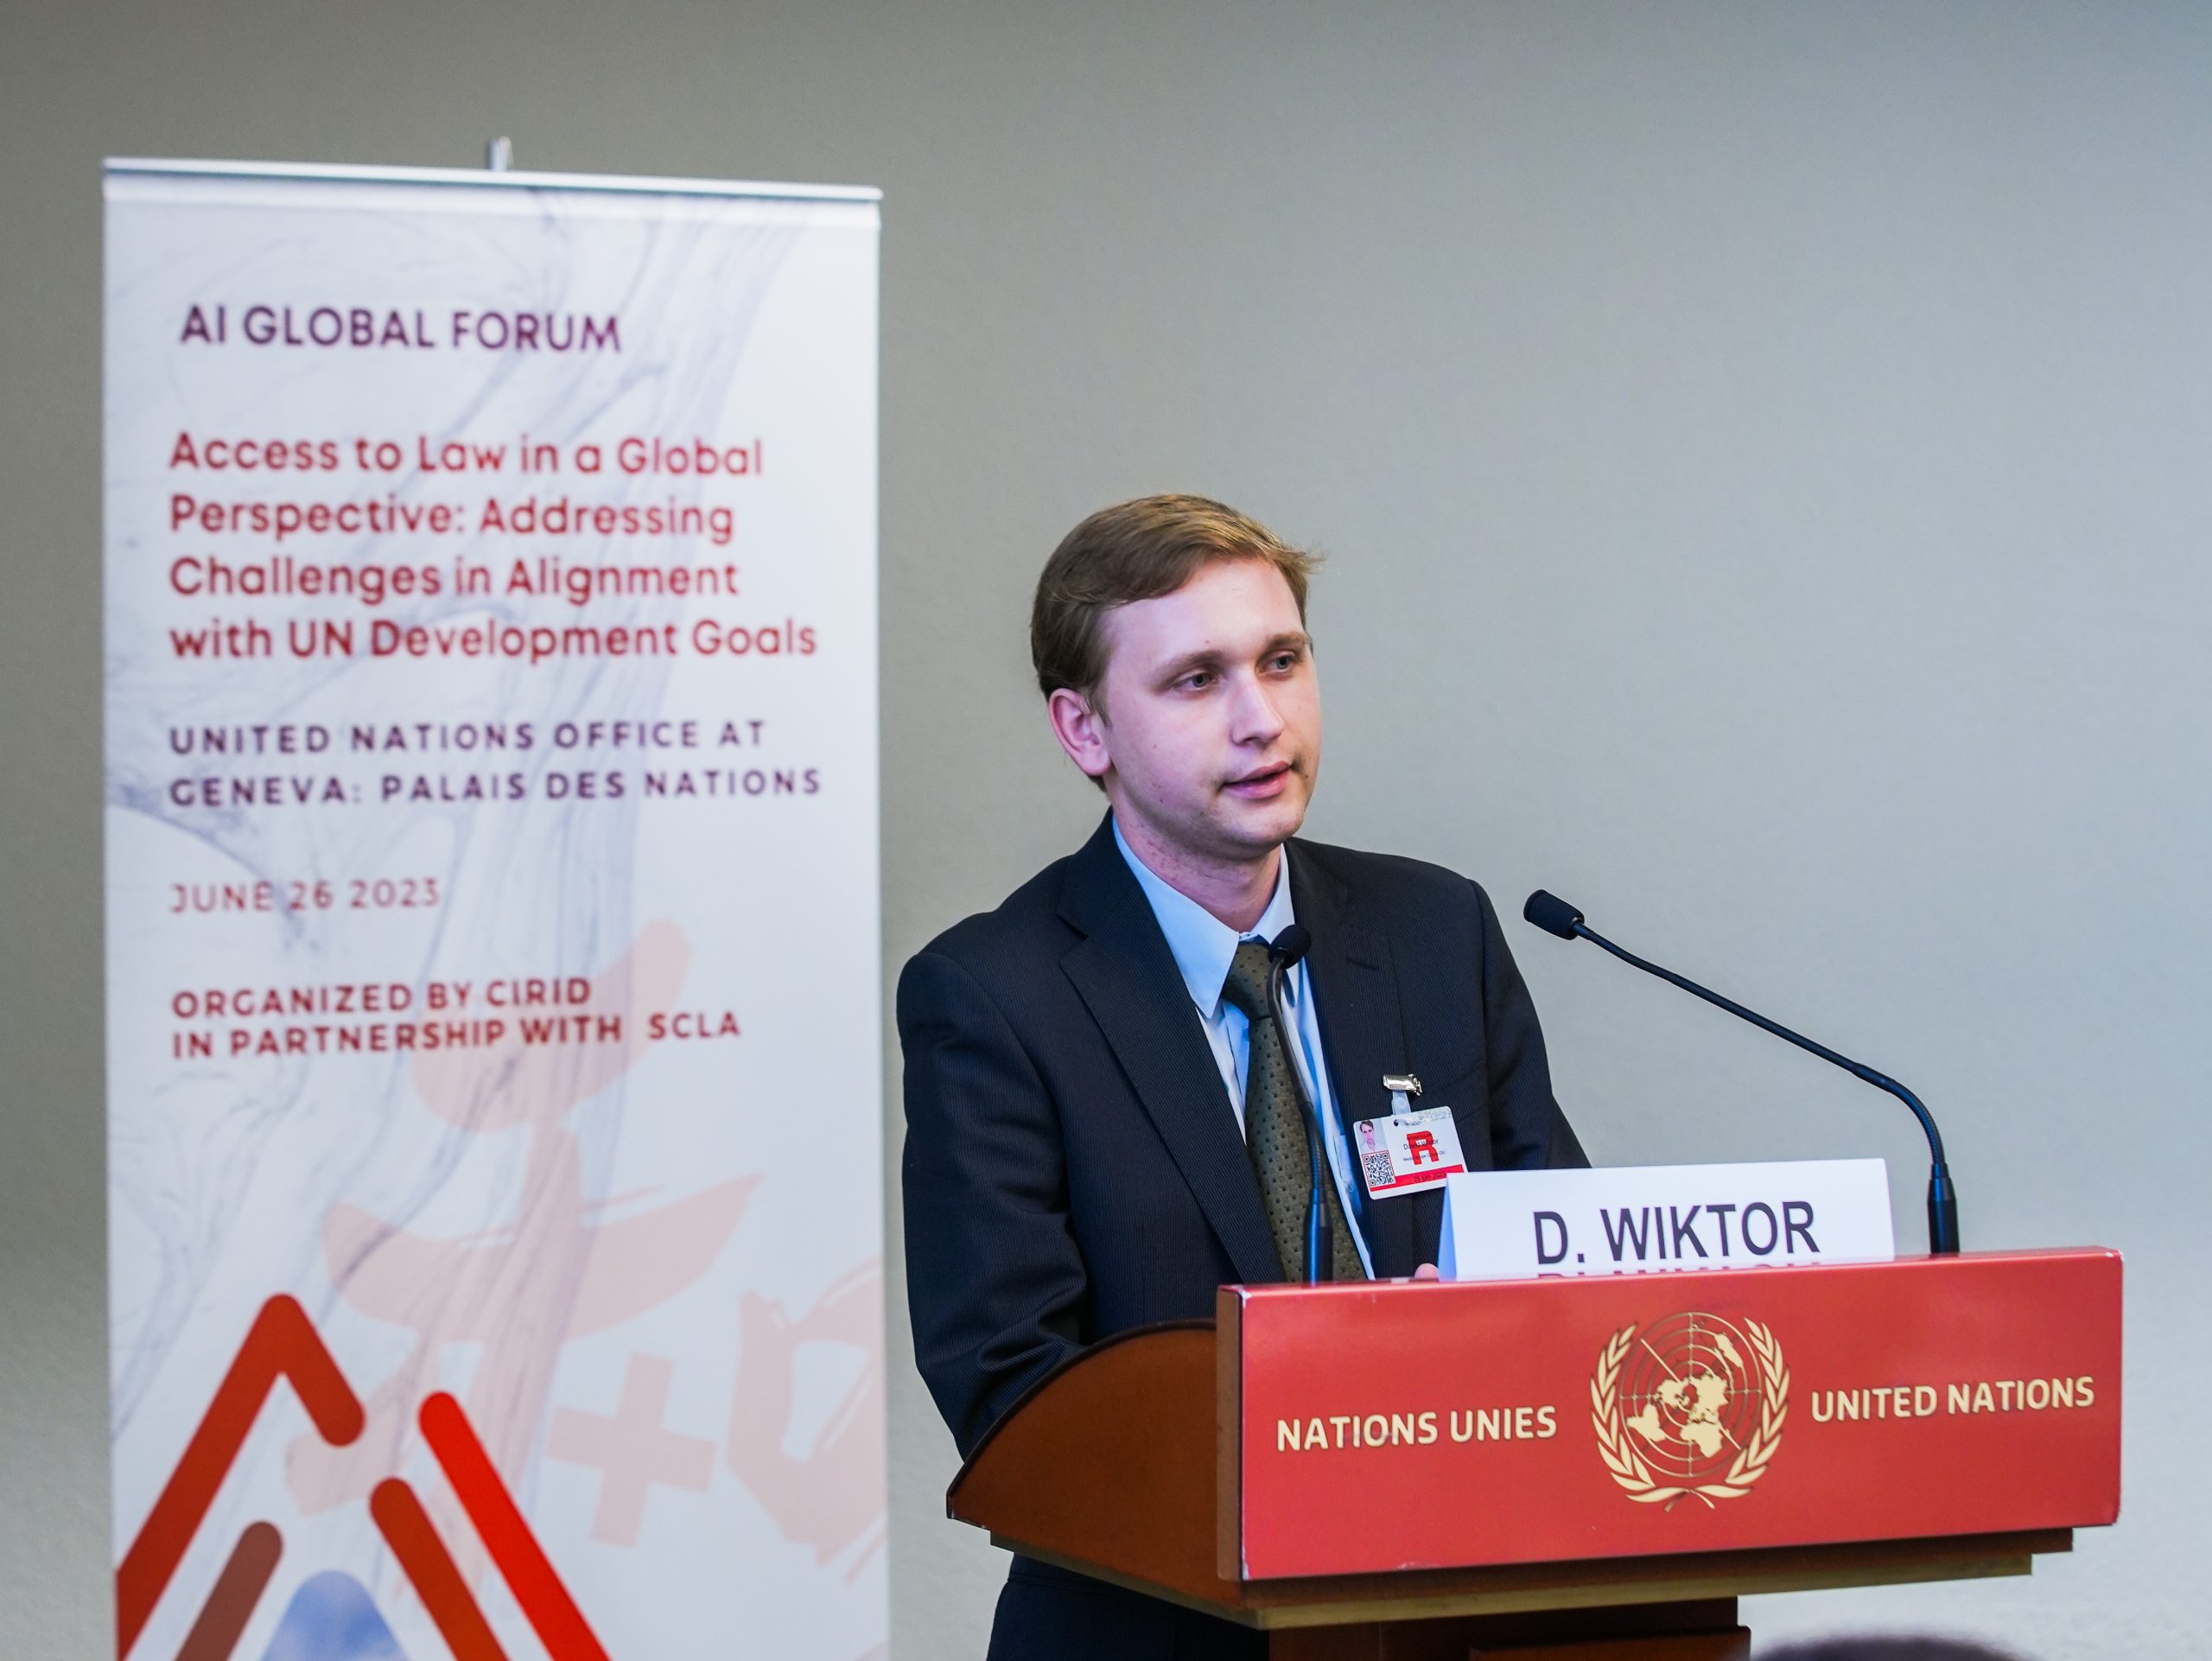 Media Scope Group CEO Dawid Wiktor attends the AI Global Forum at the UN